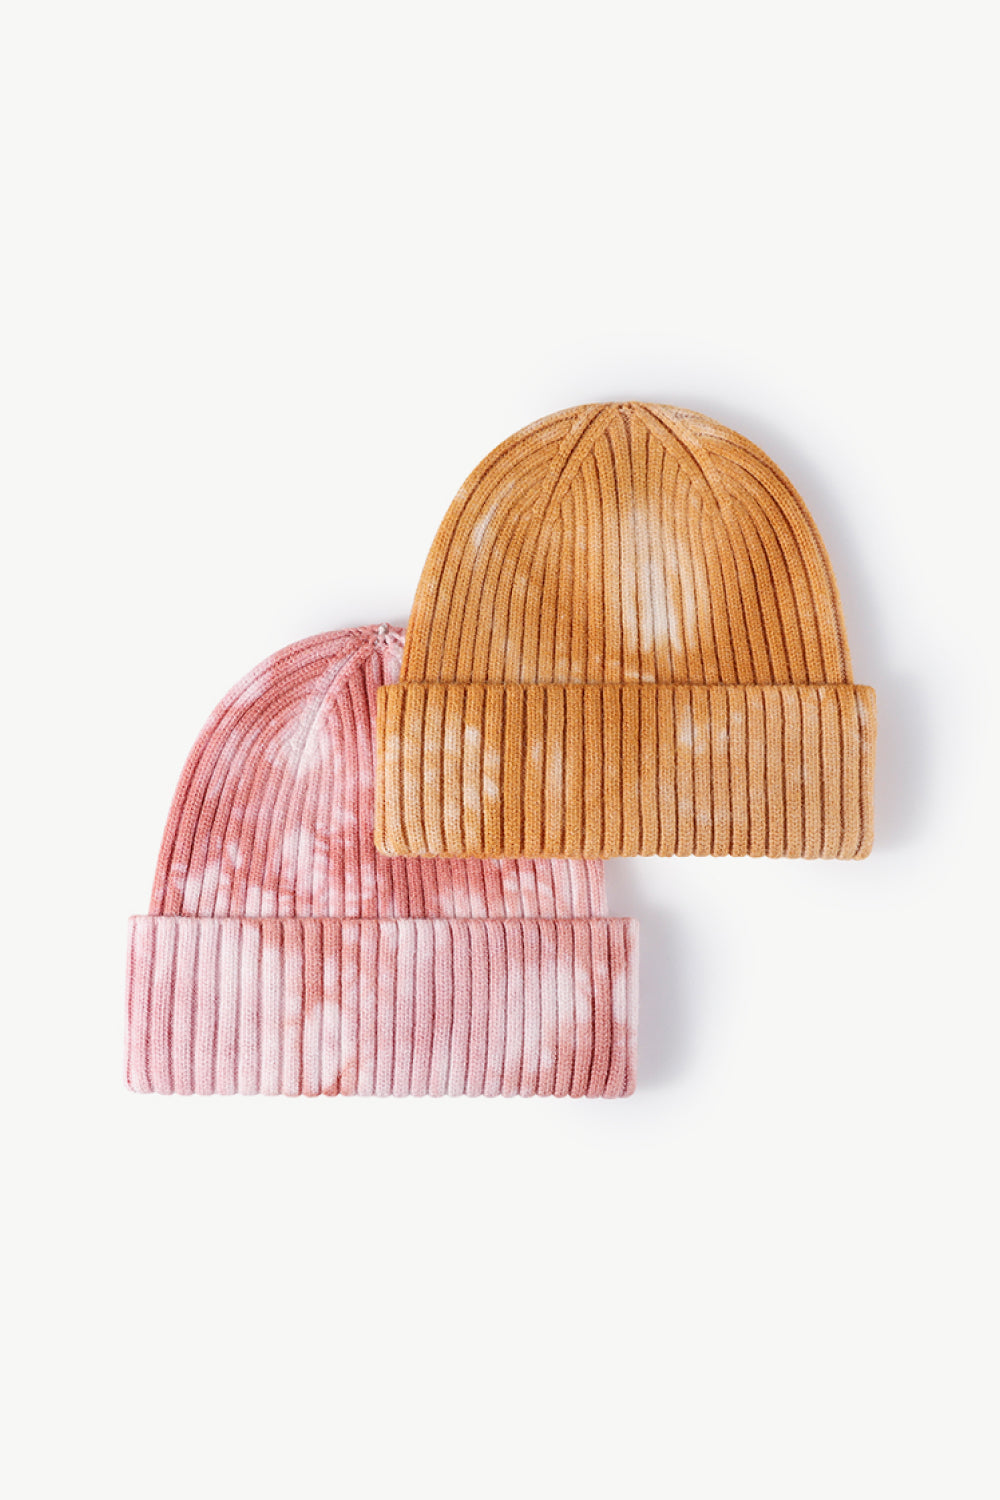 Red and Orange Unisex Tie Dye Beanie Hat, Athletic Accessories and Fitness Accessory